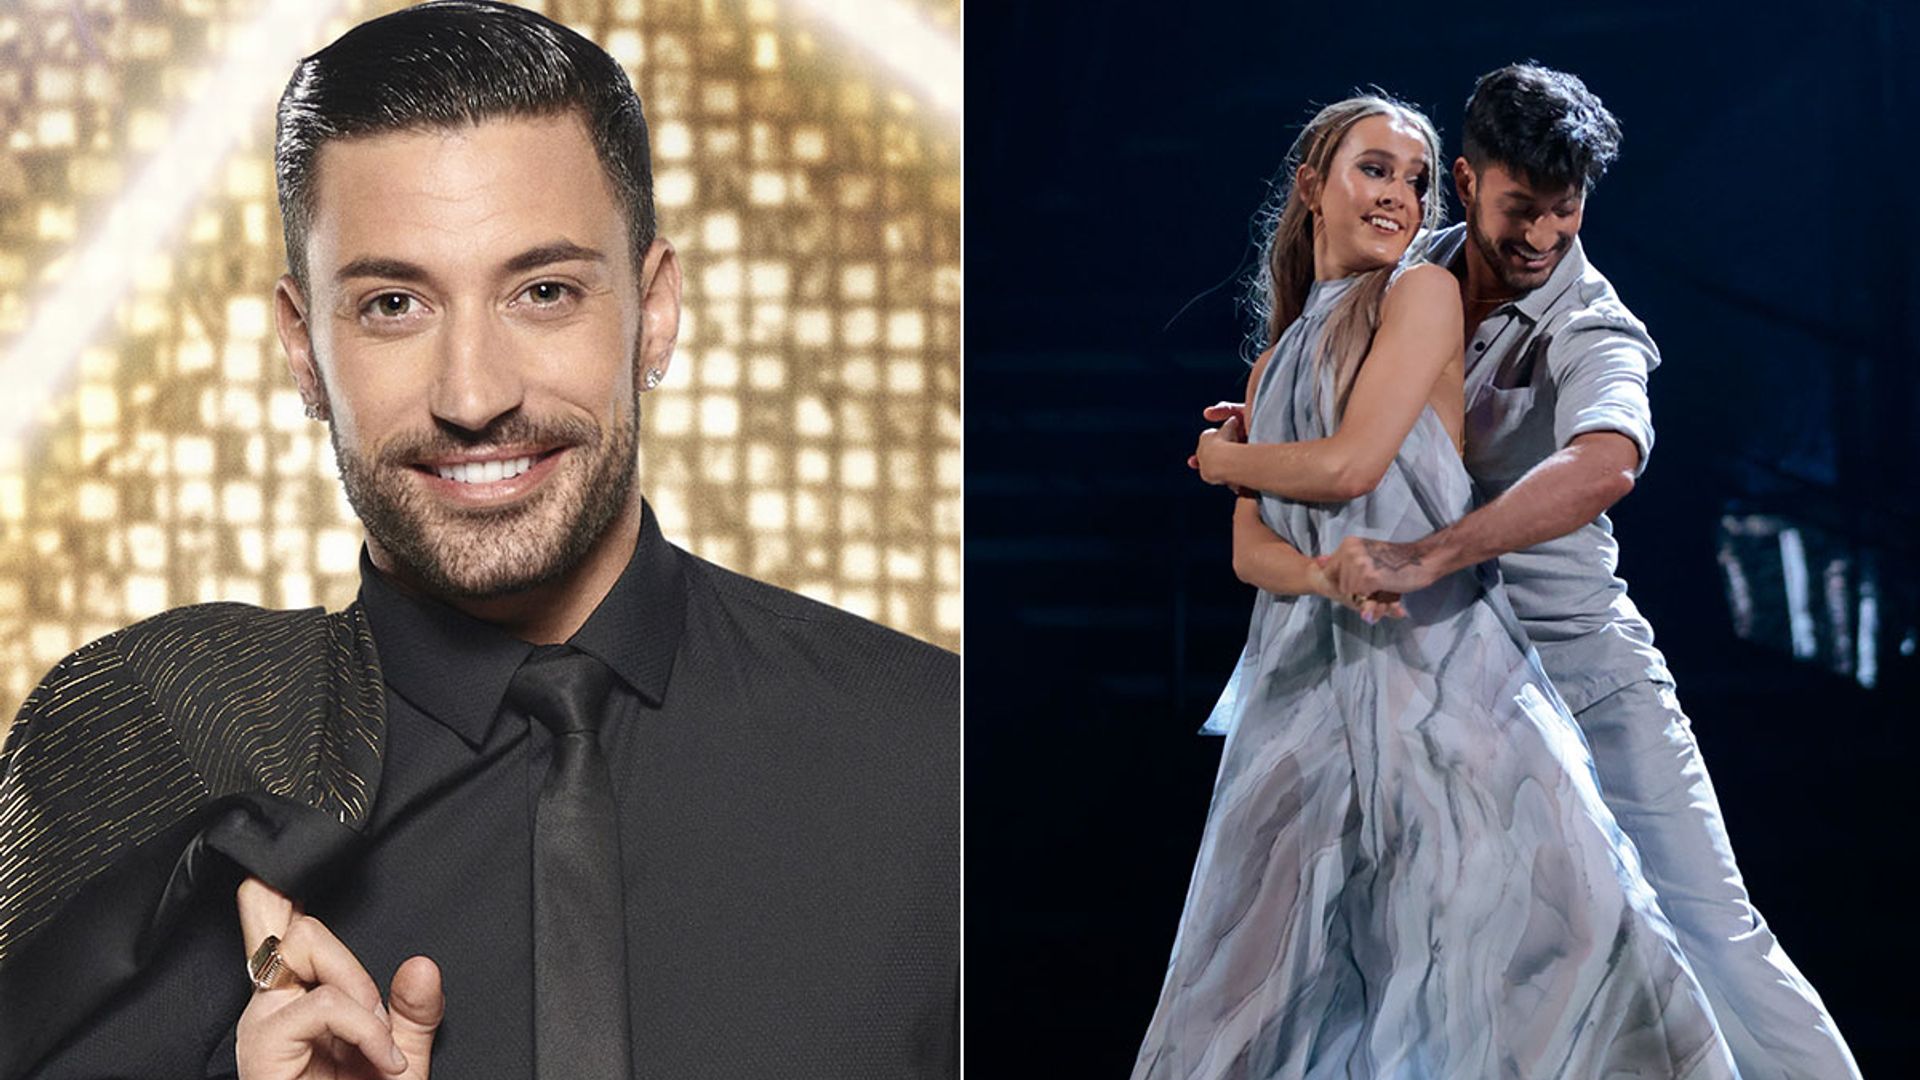 giovanni pernice strictly